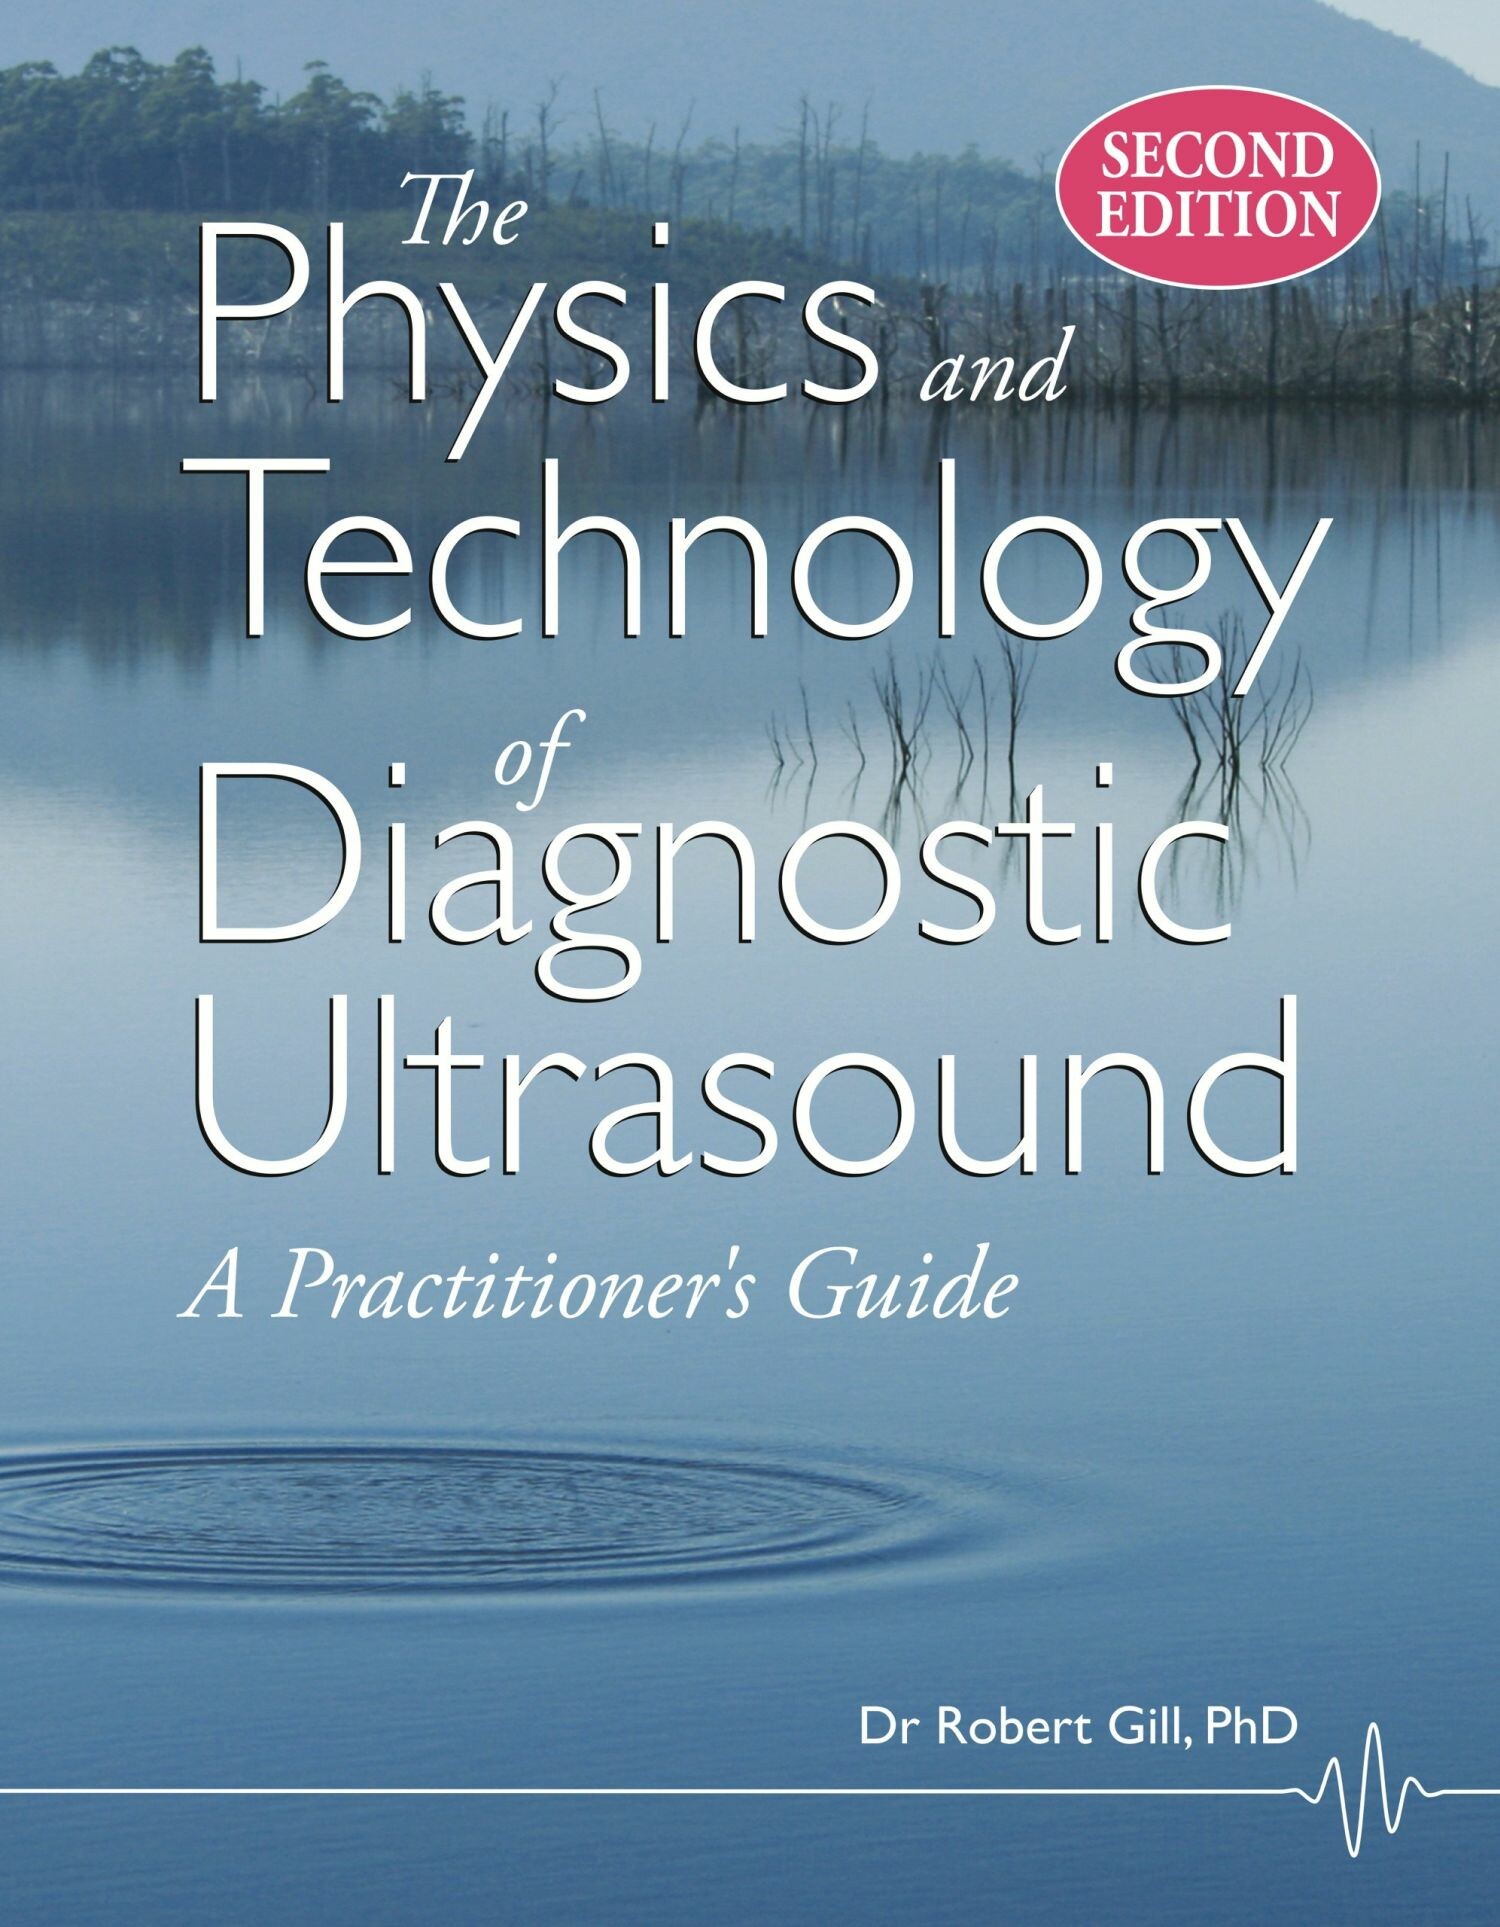 The Physics and Technology of Diagnostic Ultrasound (Second Edition)